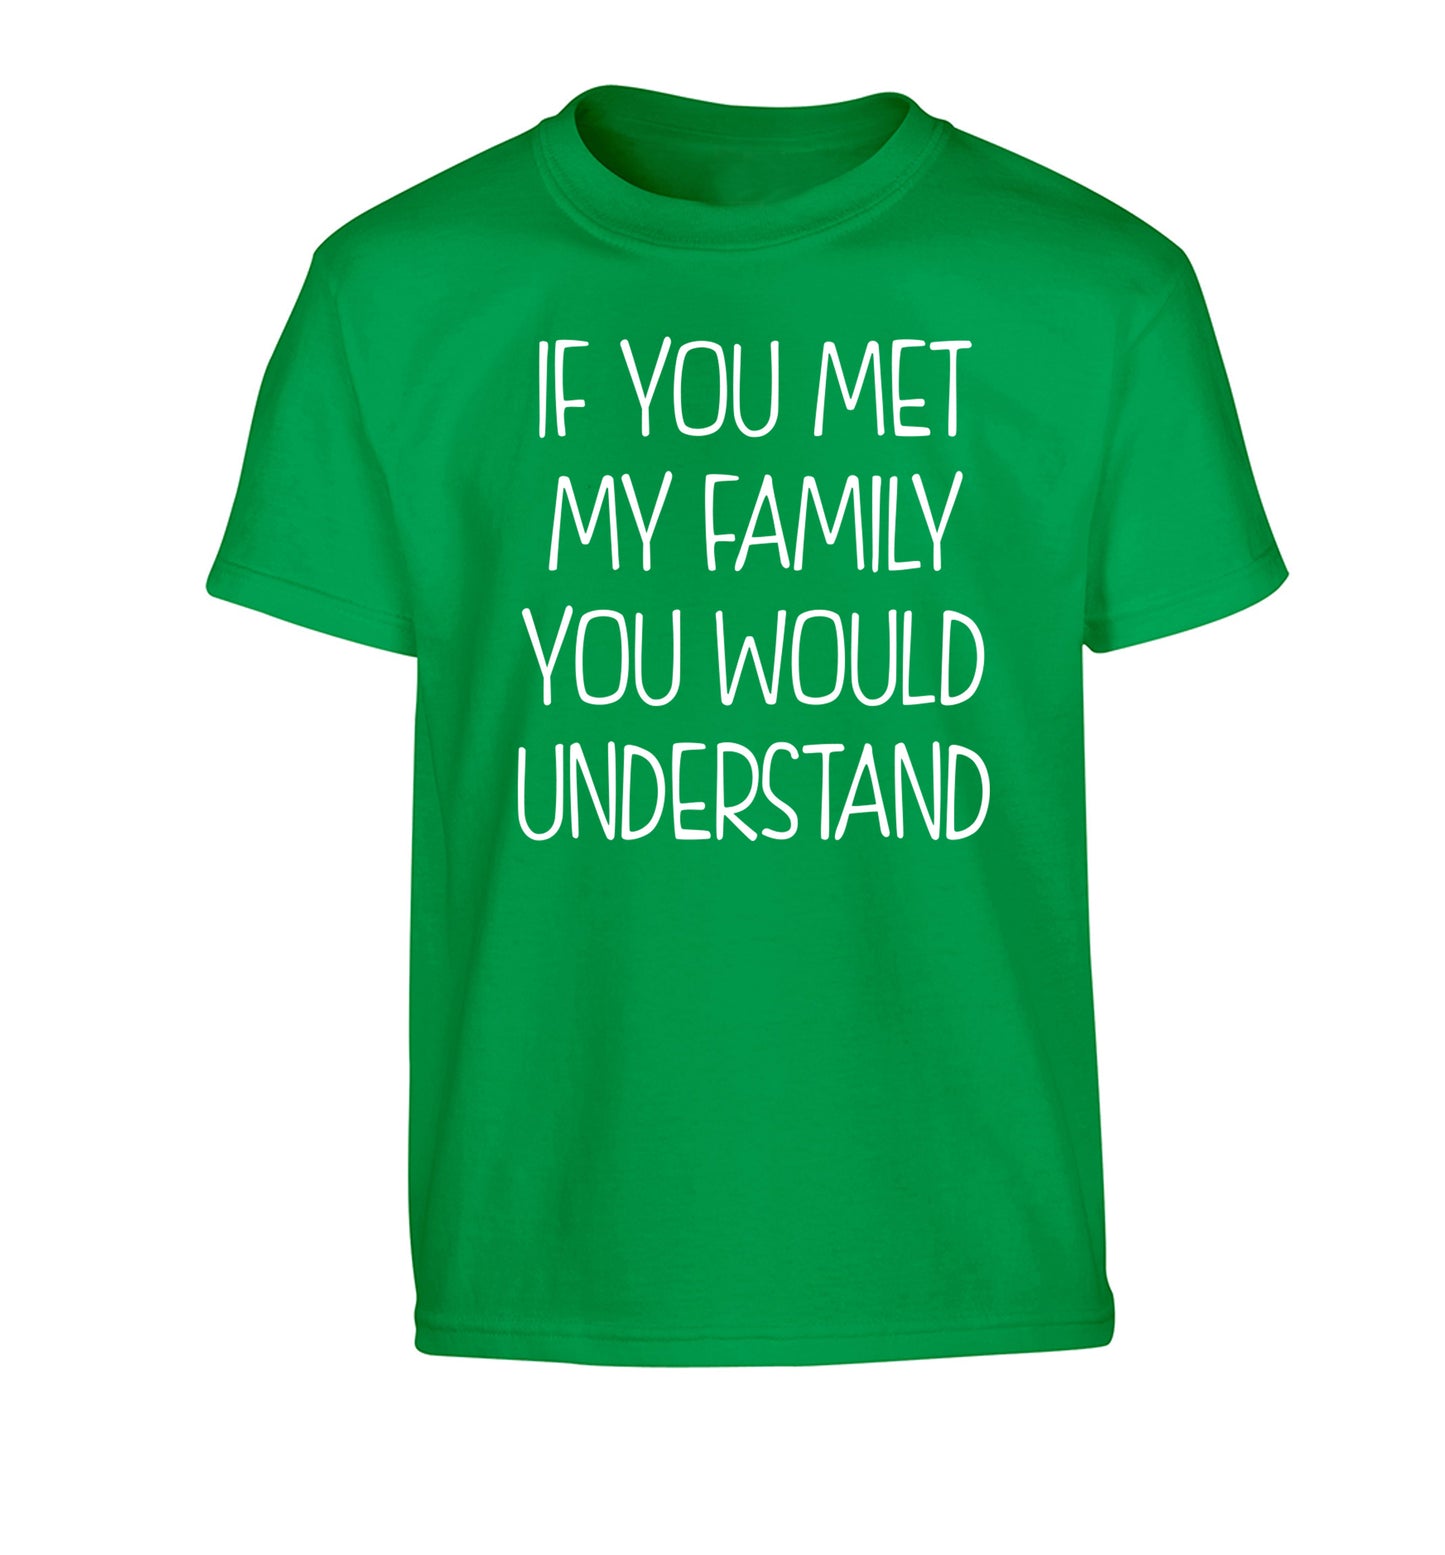 If you met my family you would understand Children's green Tshirt 12-13 Years